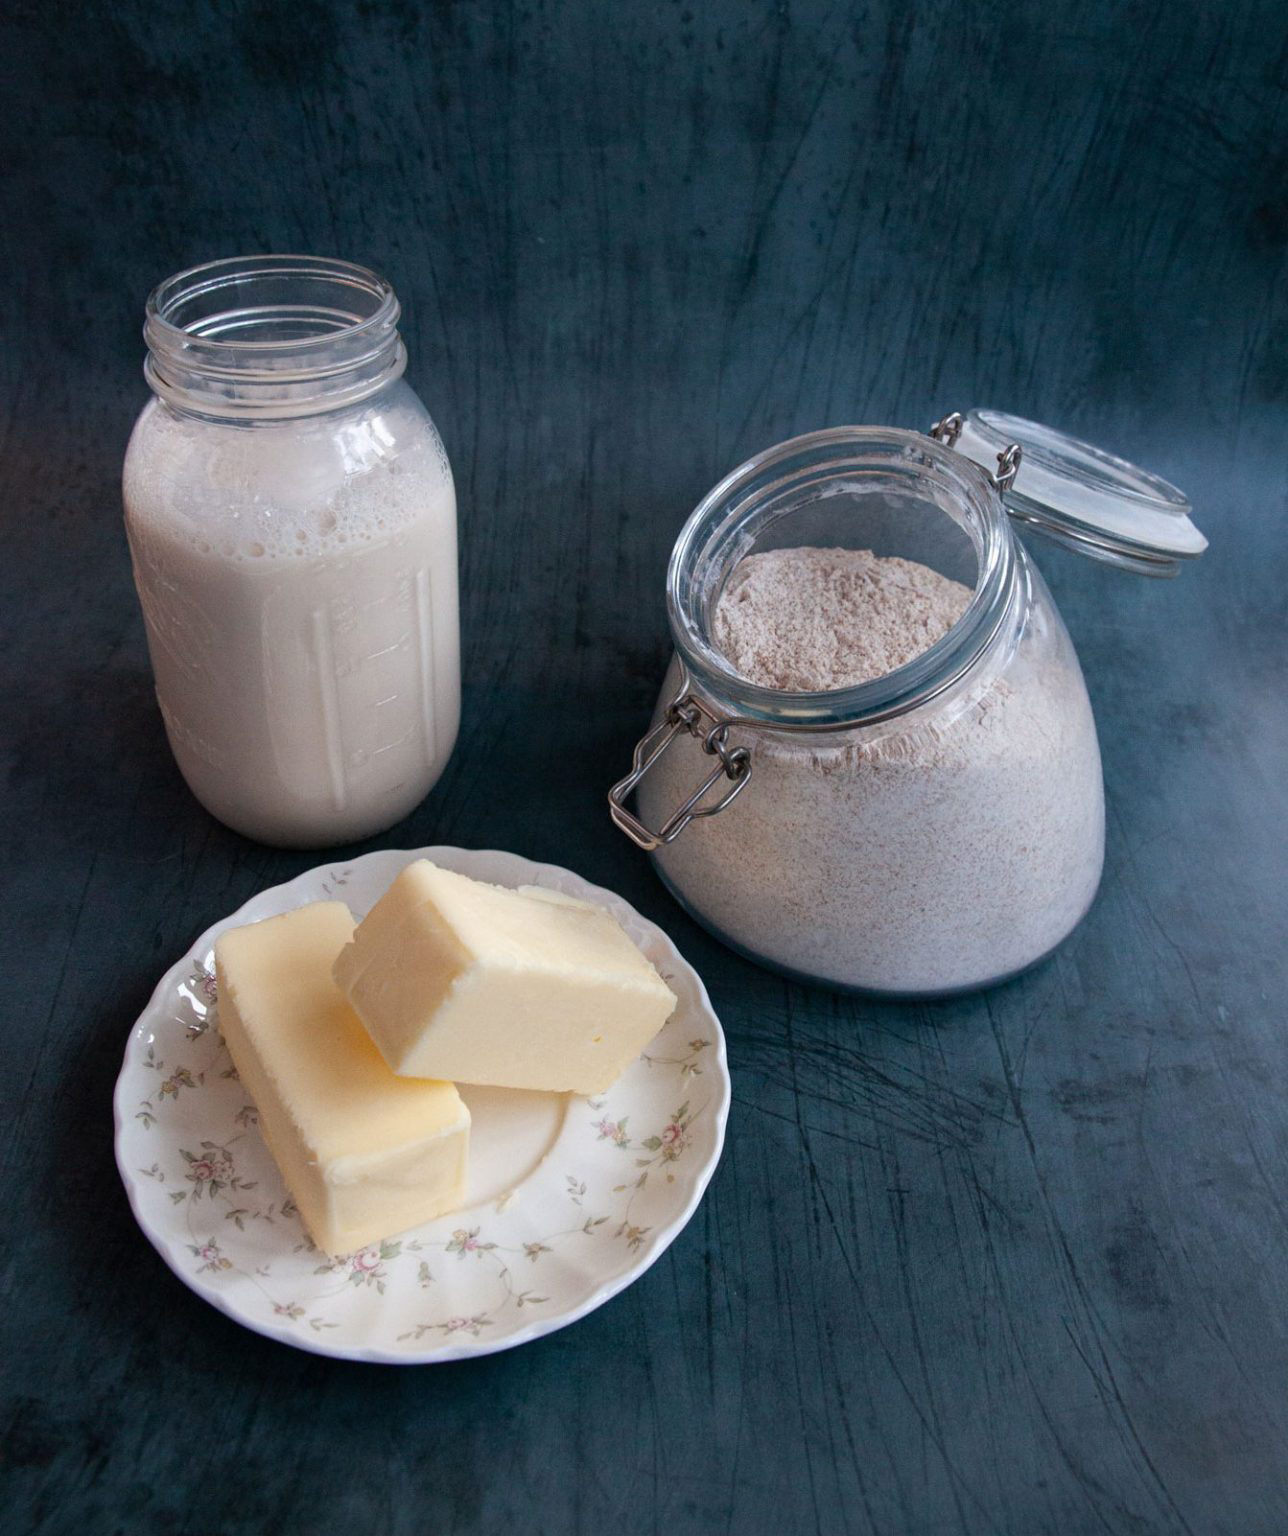 A small jar of milk, a plate of butter and a container of flour resting on a table.